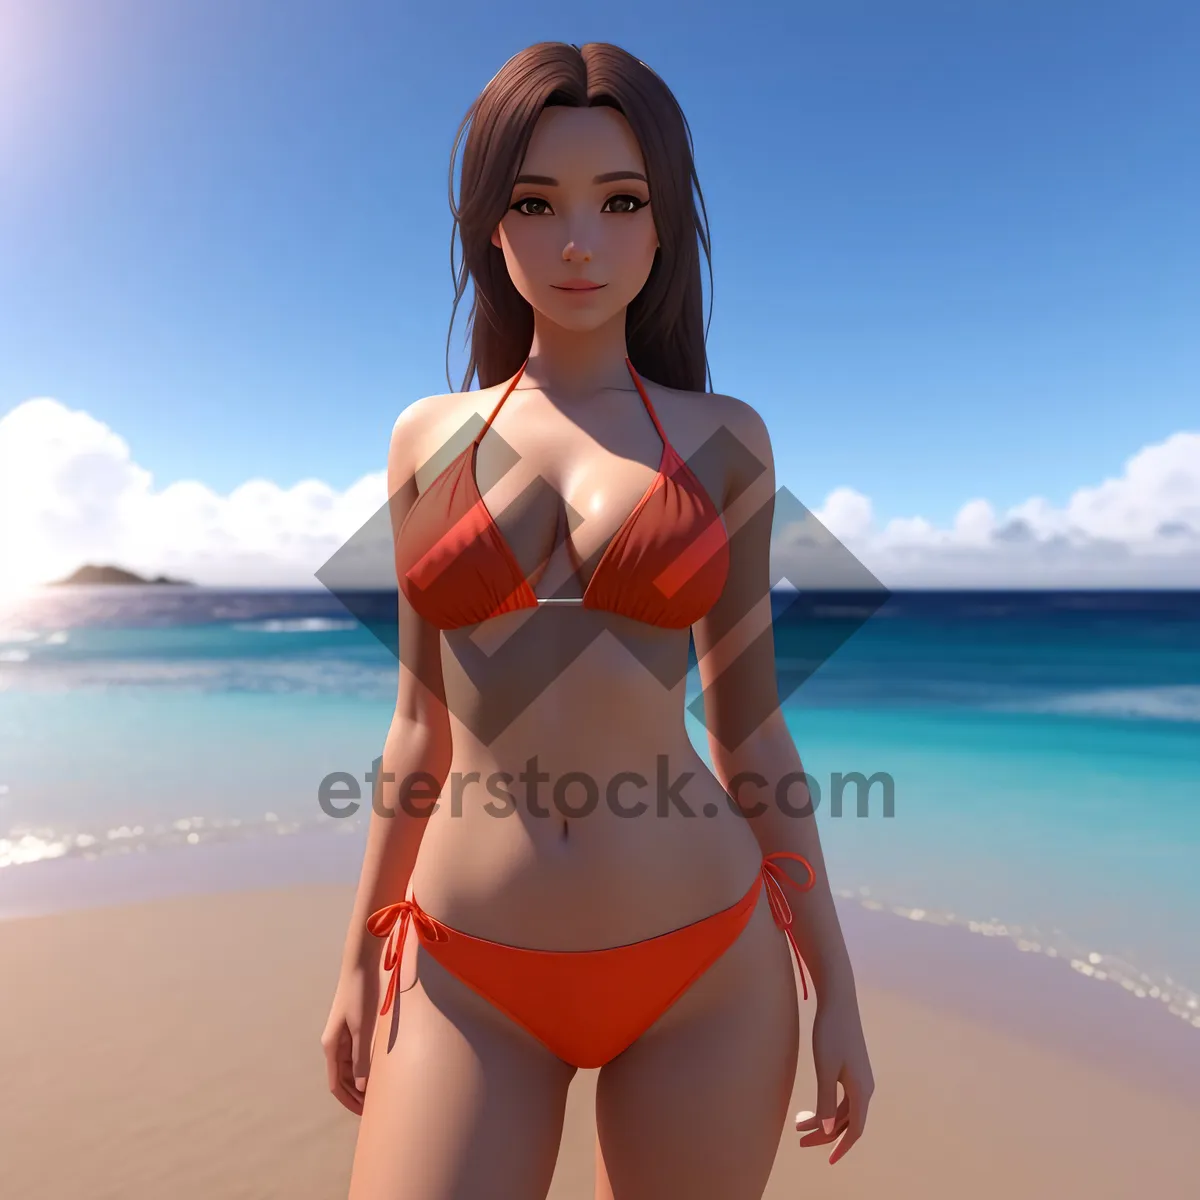 Picture of Beach Babe in Stylish Swimsuit Enjoying Tropical Getaway